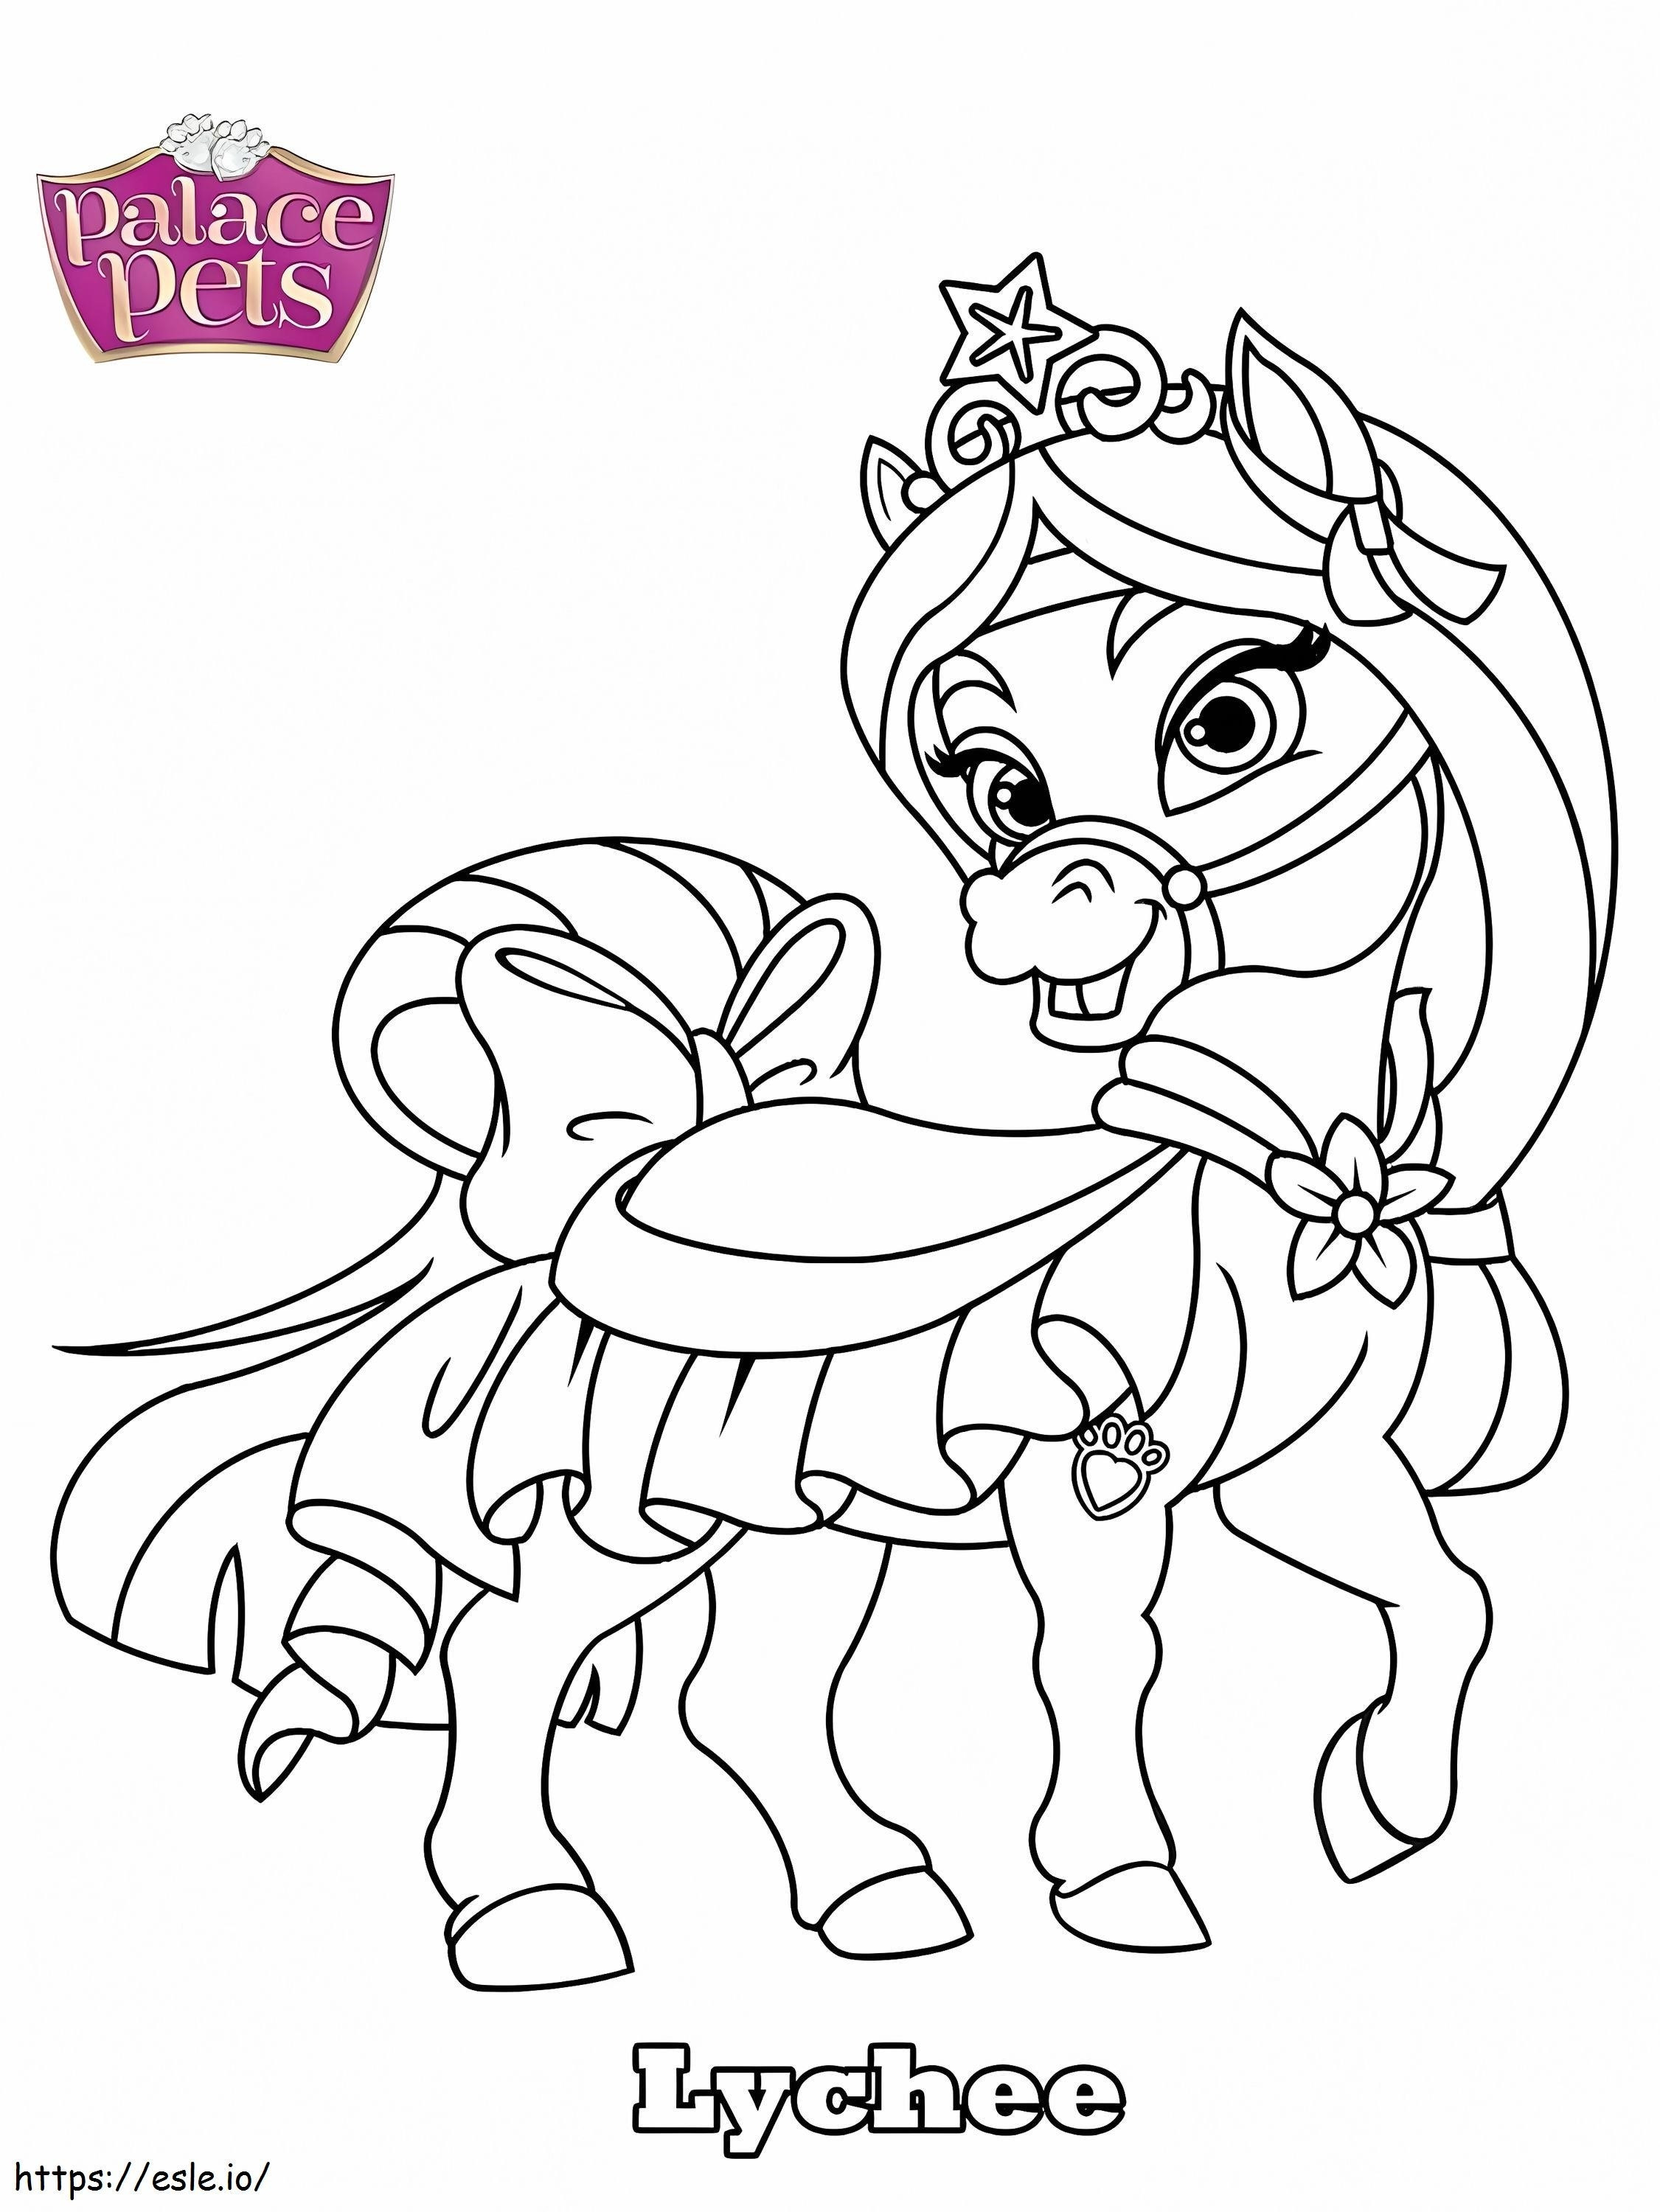 1587025705 Palace Pets Lychee coloring page